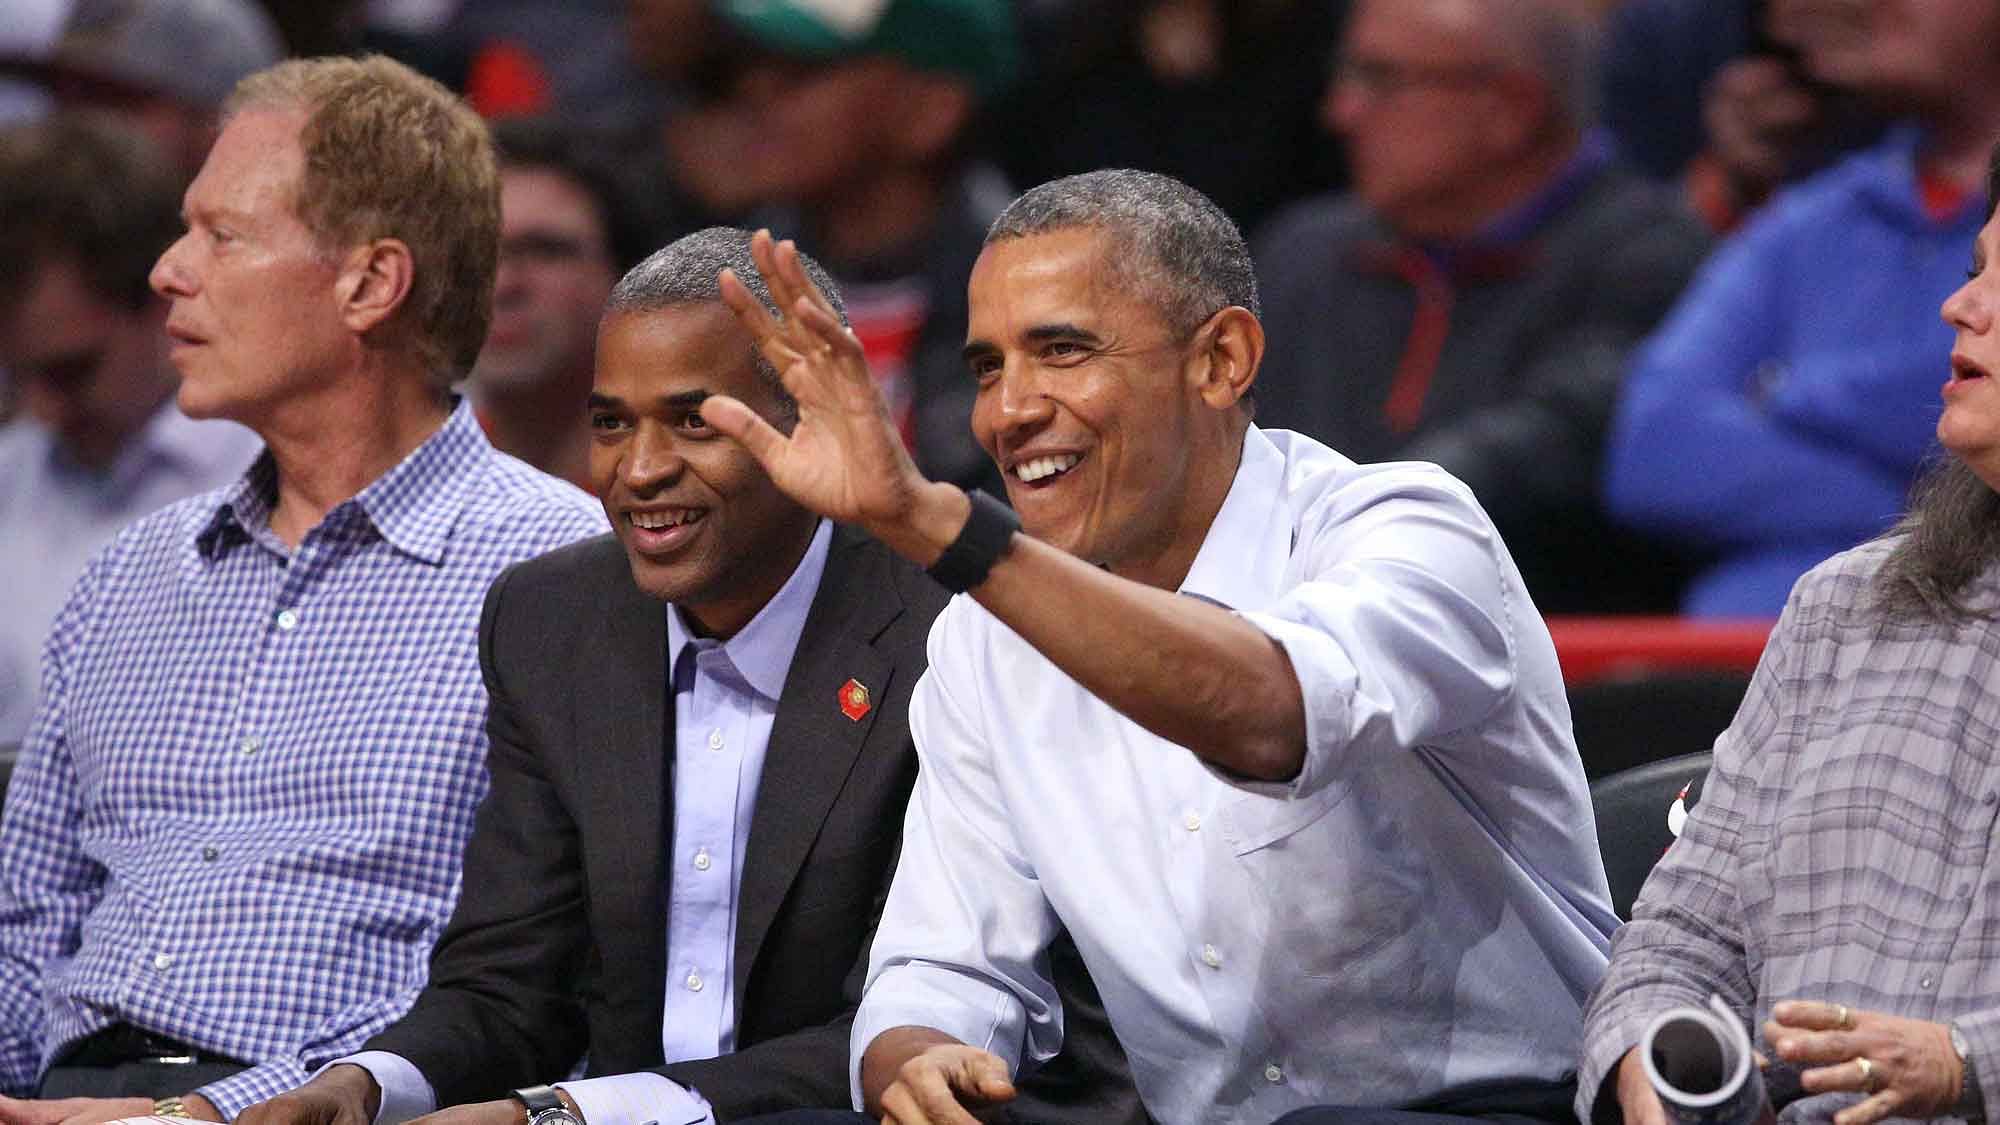 United States President Barack Obama during the first half of the game between the Chicago Bulls and the Cleveland Cavaliers at the United Center. (Photo: Reuters)